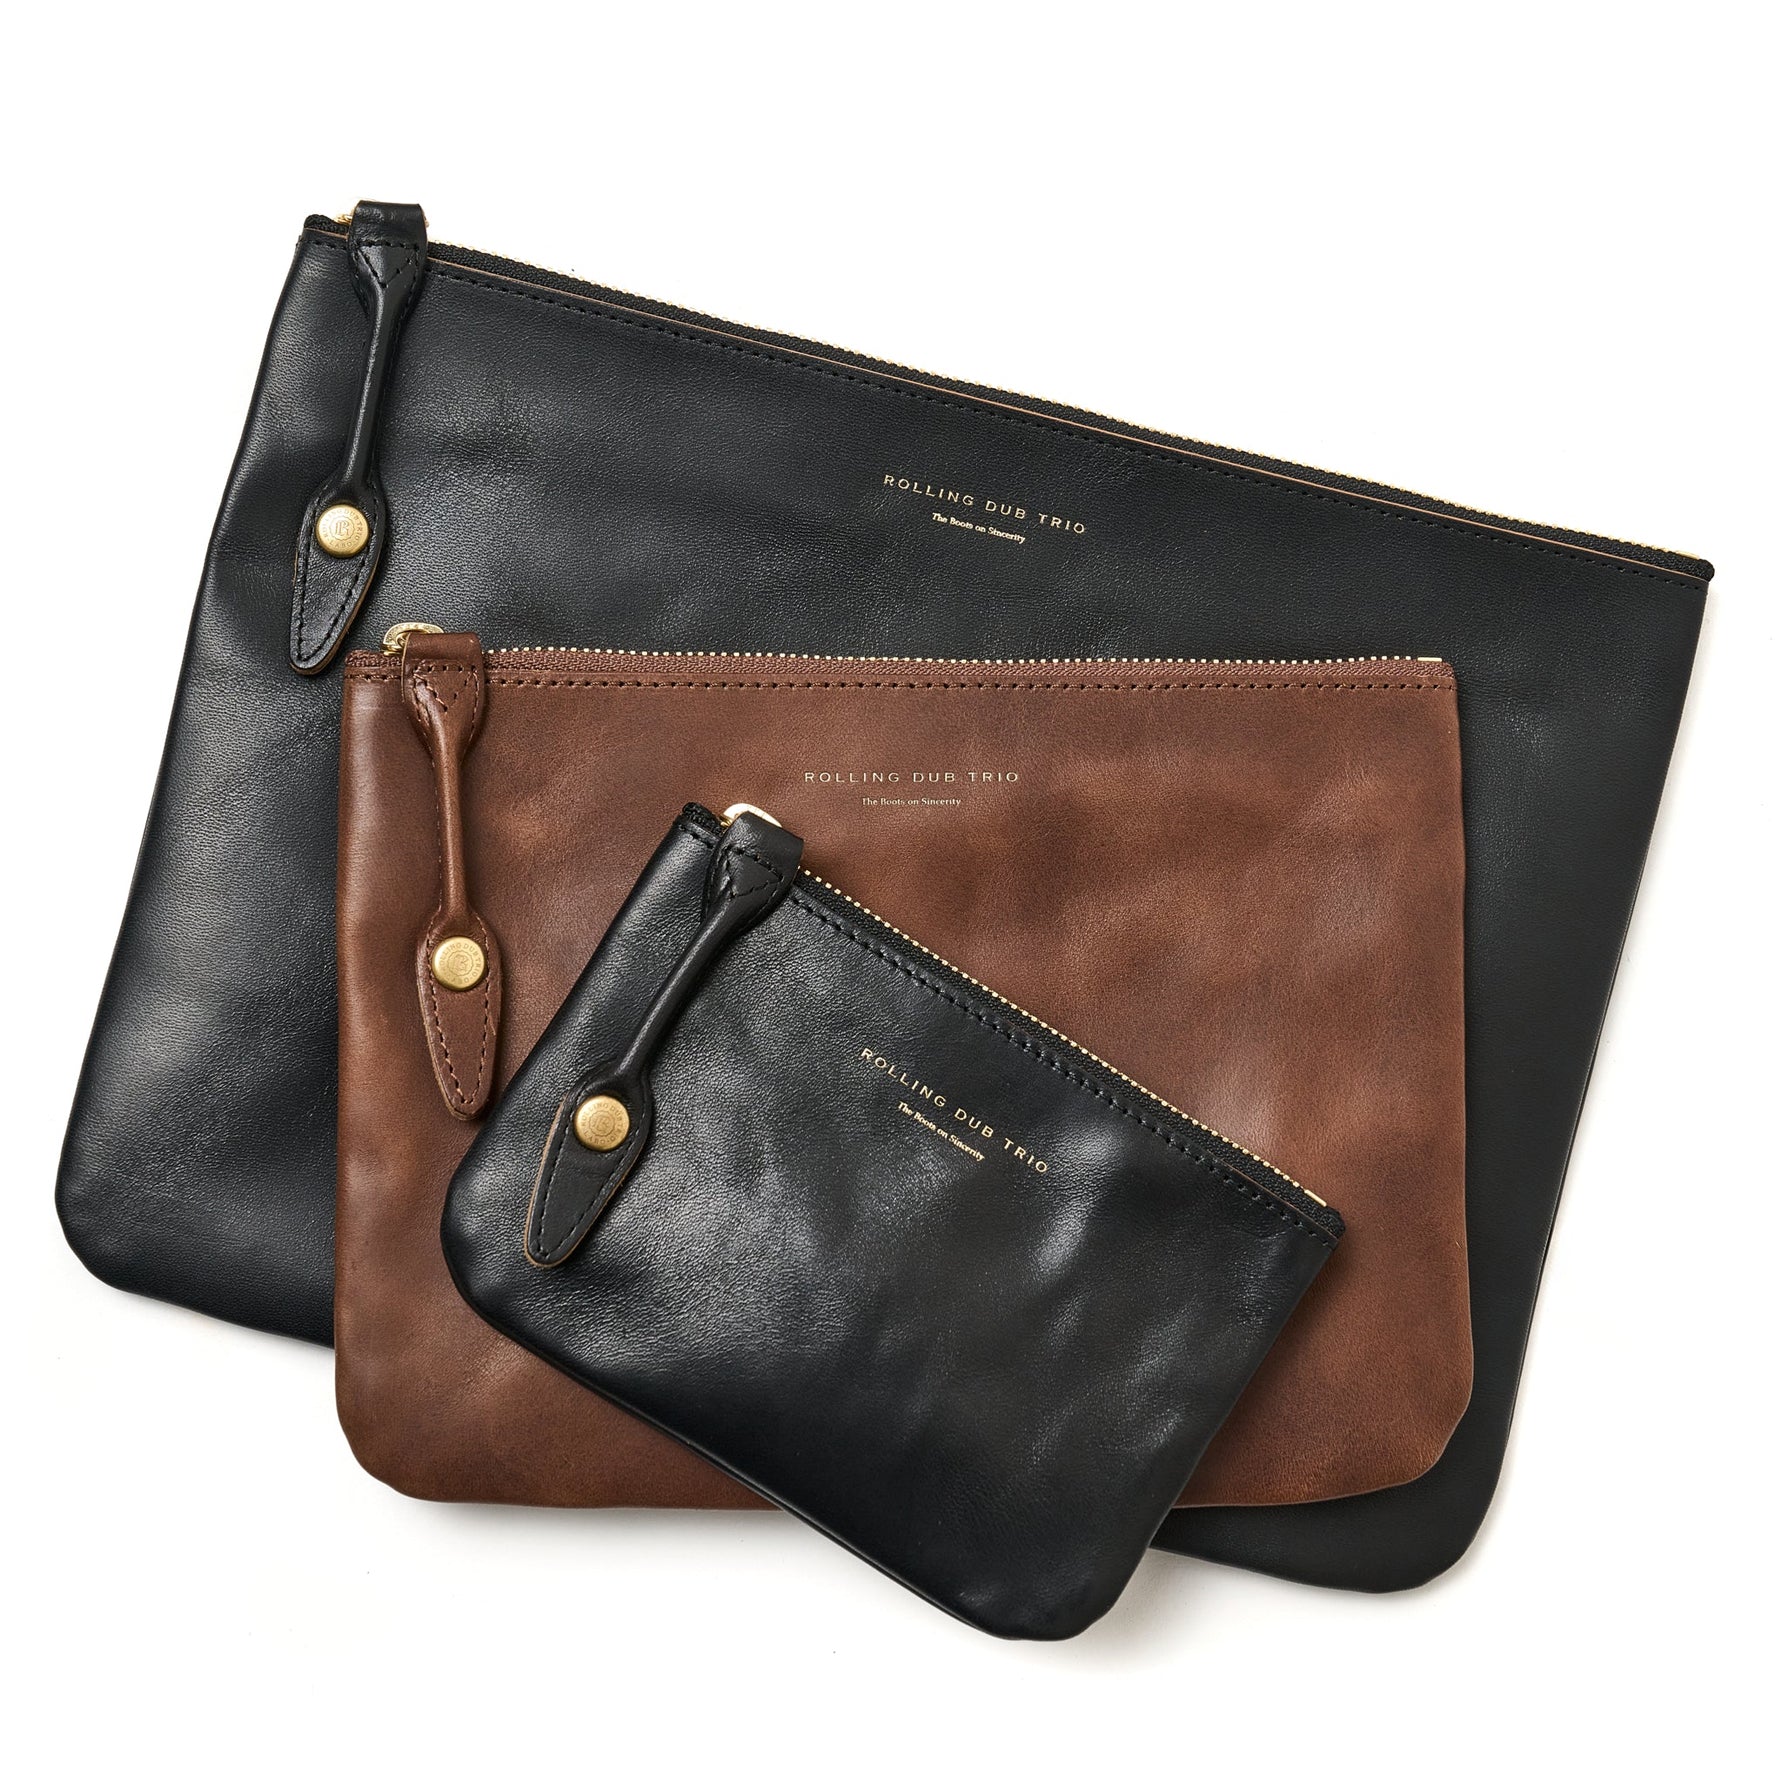 Rolling Dub Trio - Square Zip & Snap Pouch